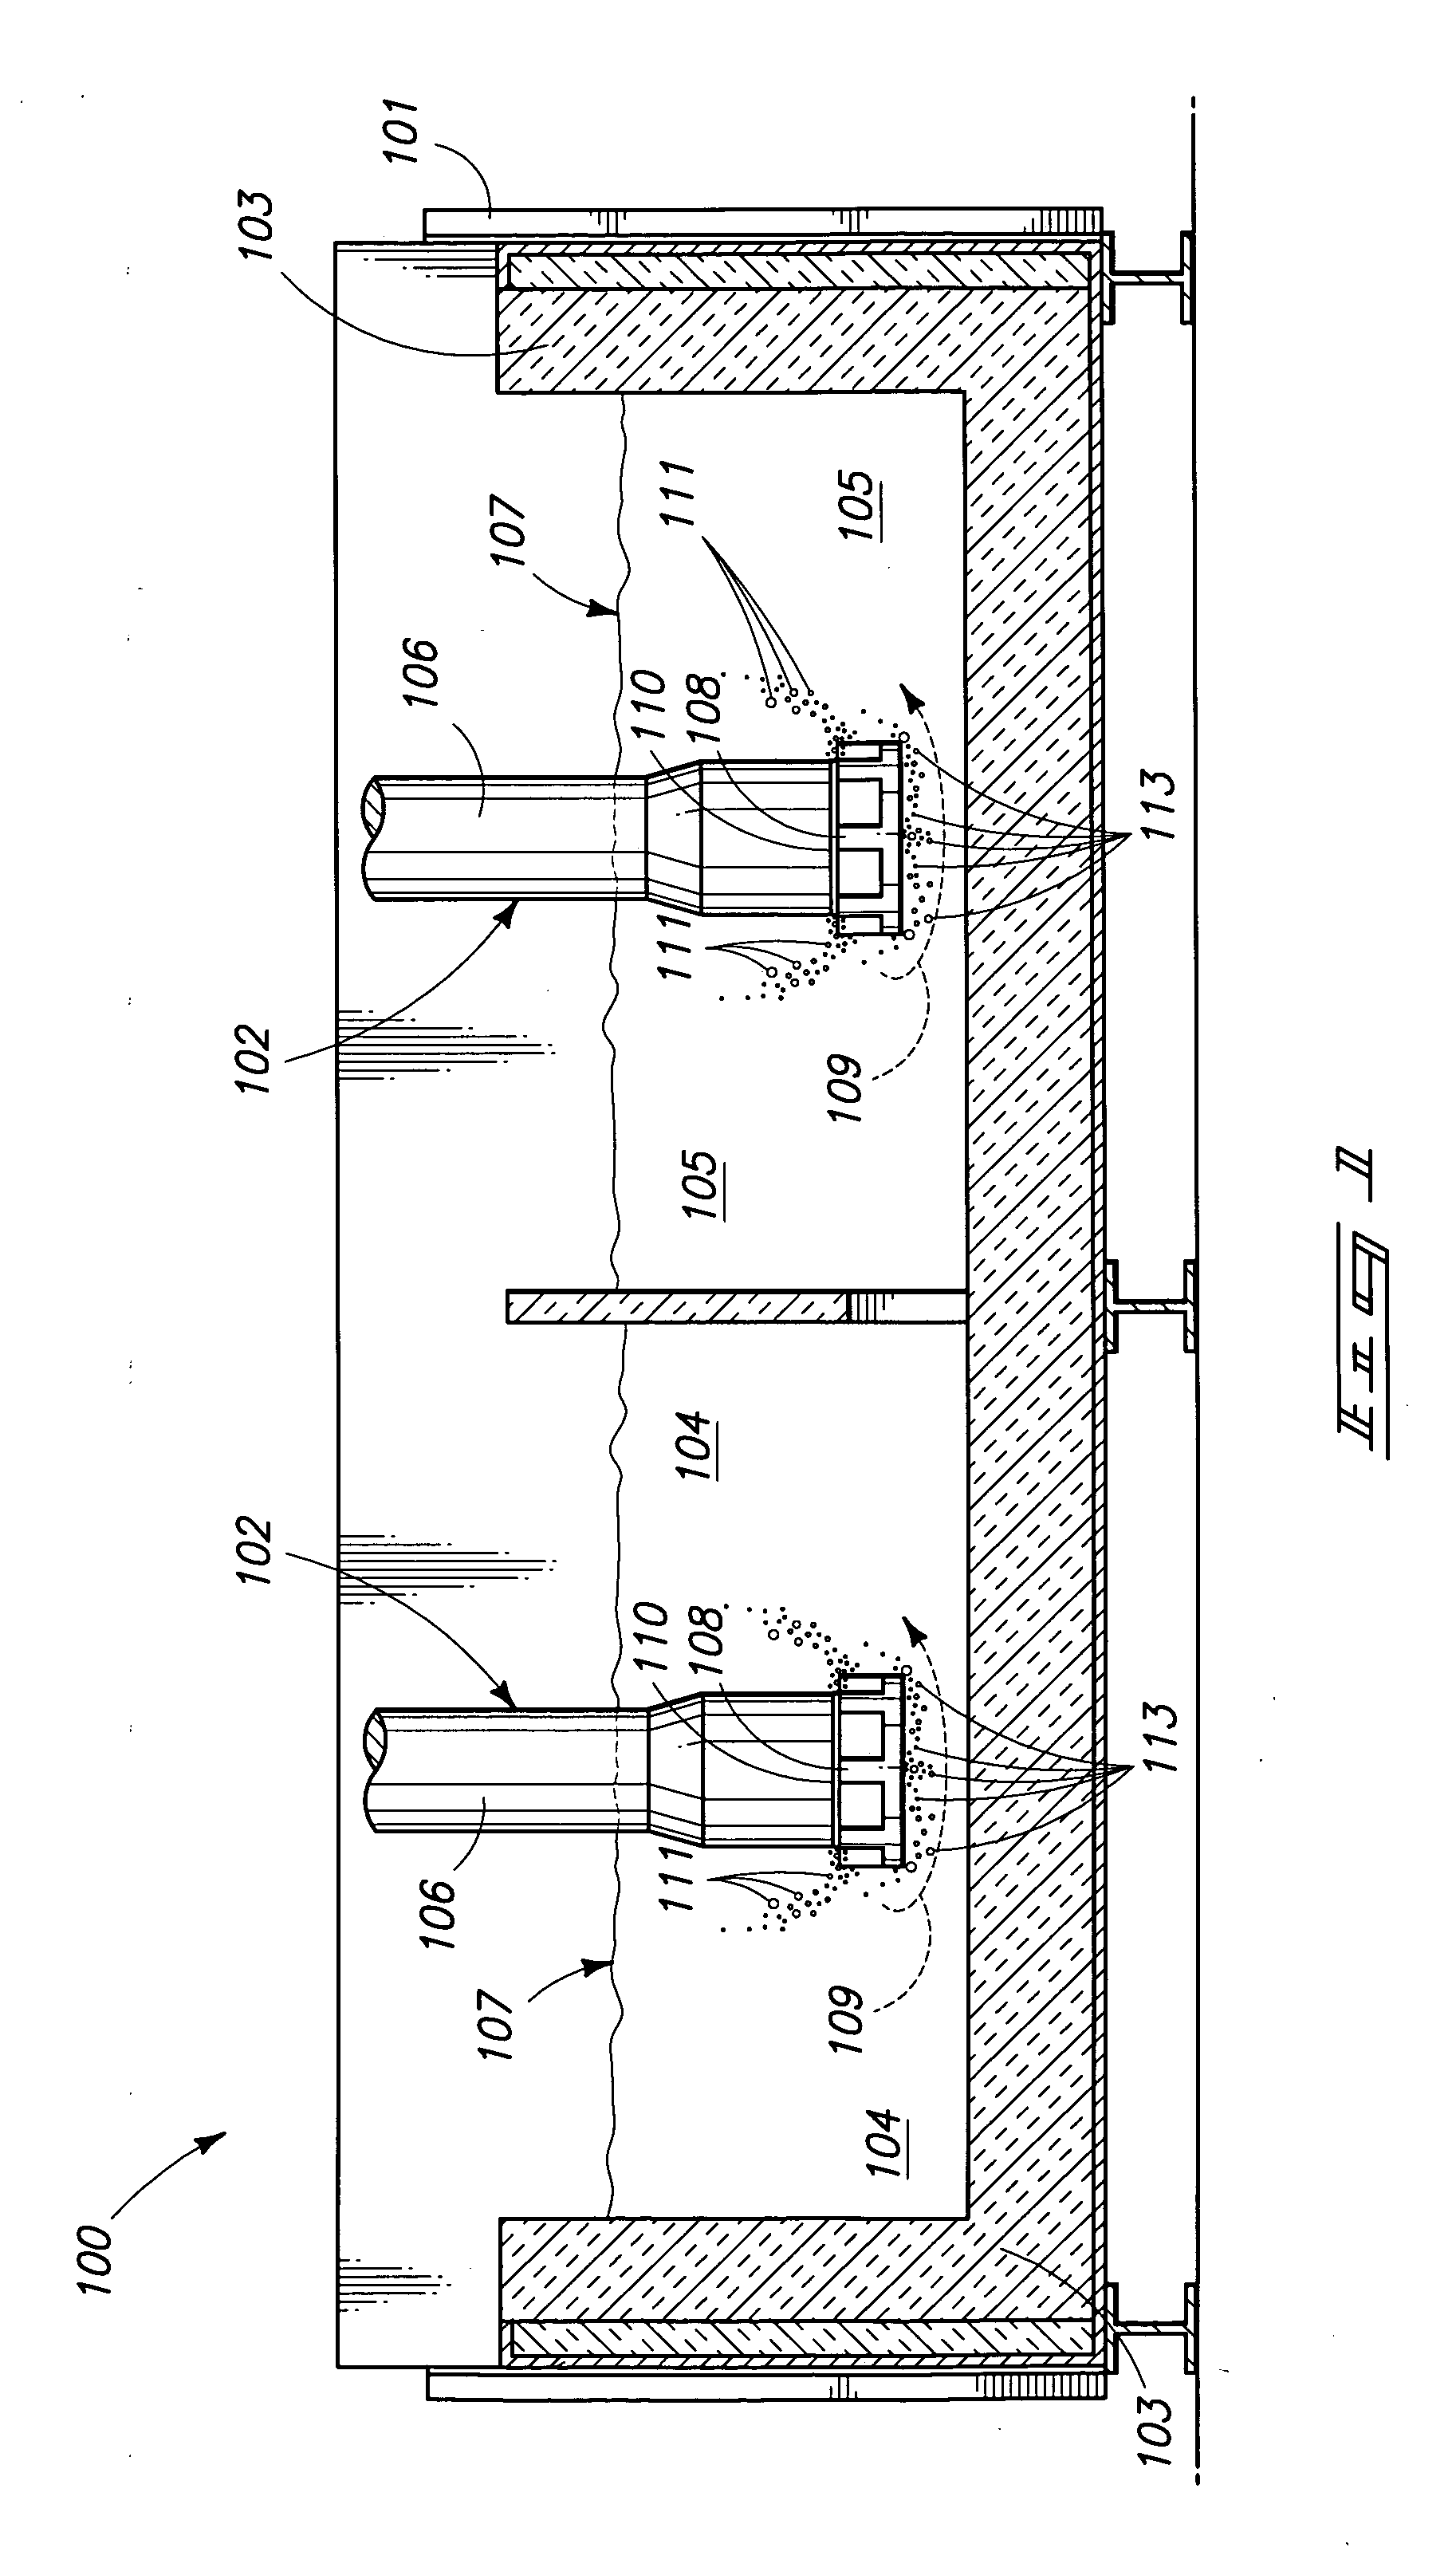 Molten aluminum refining and gas dispersion system